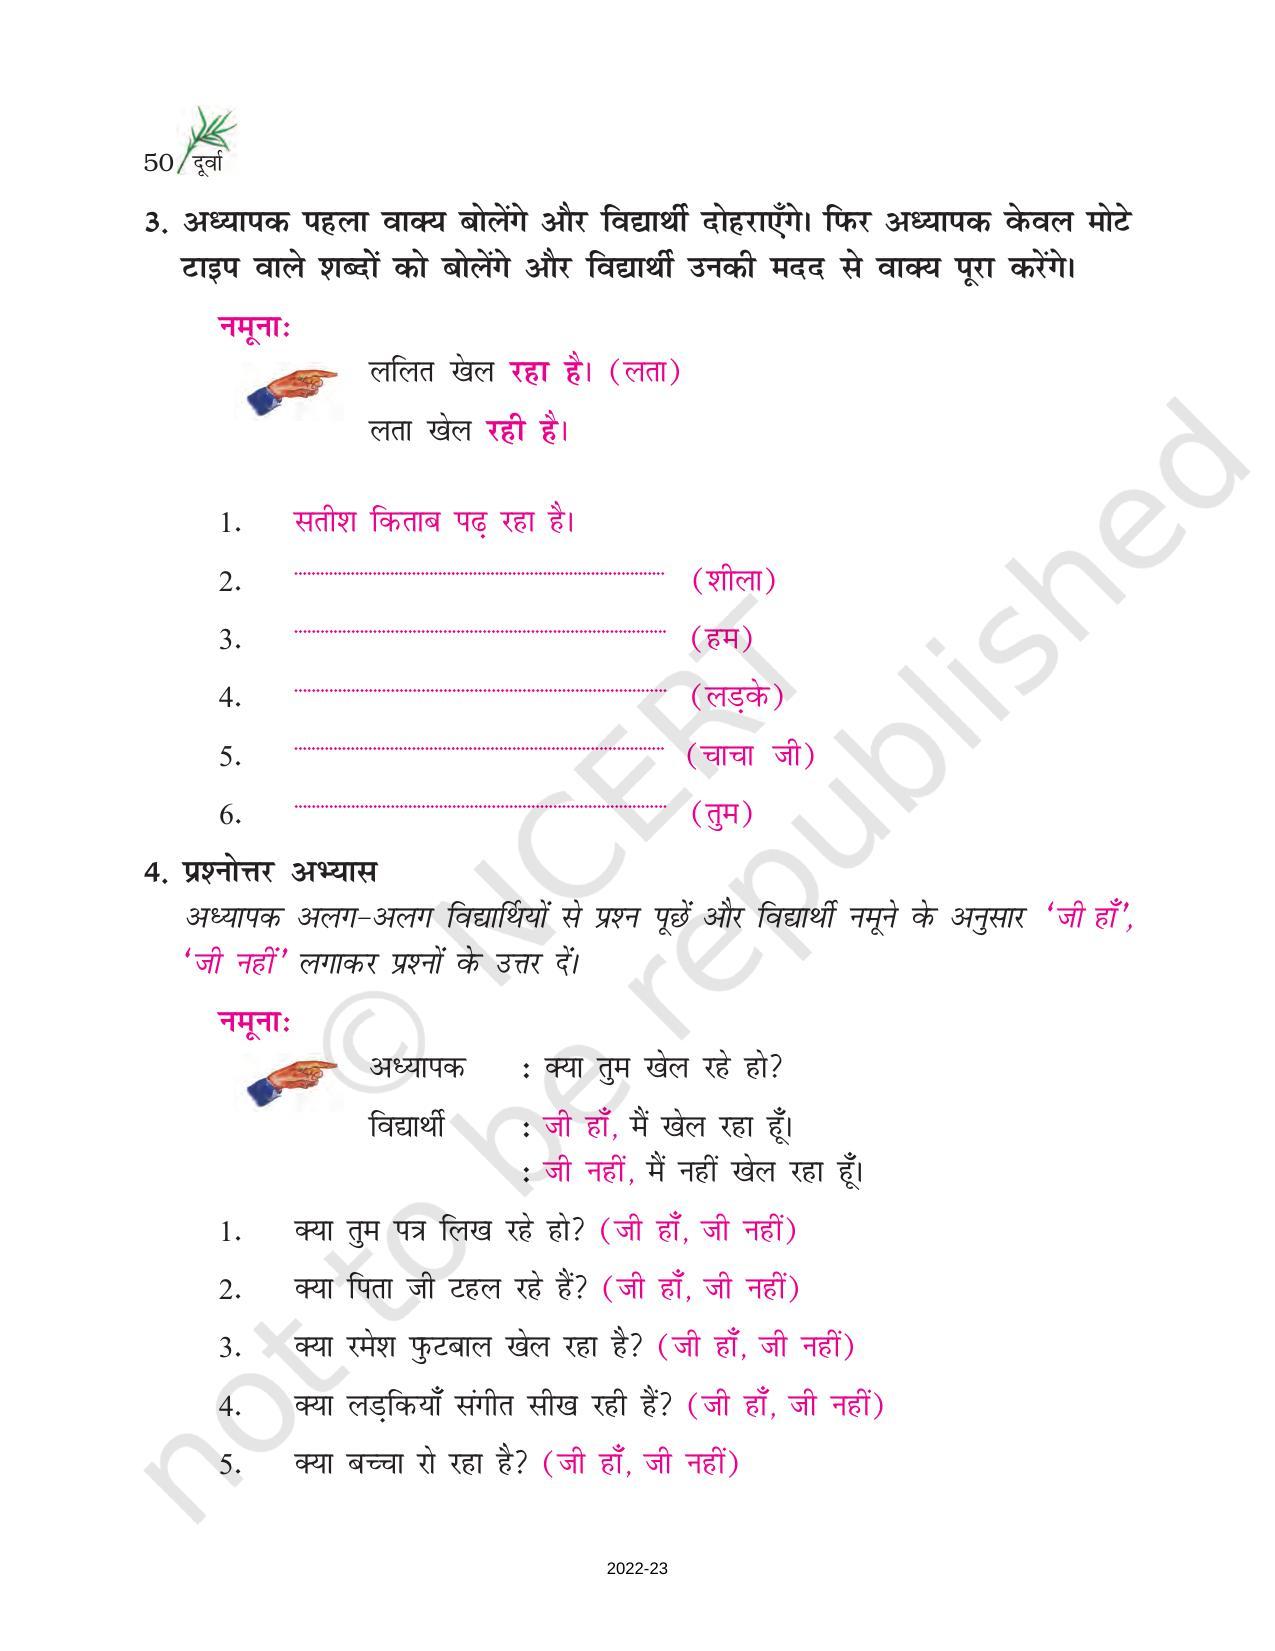 NCERT Book for Class 6 Hindi(Doorva Part 1) : Chapter 9-कक्षा - Page 4